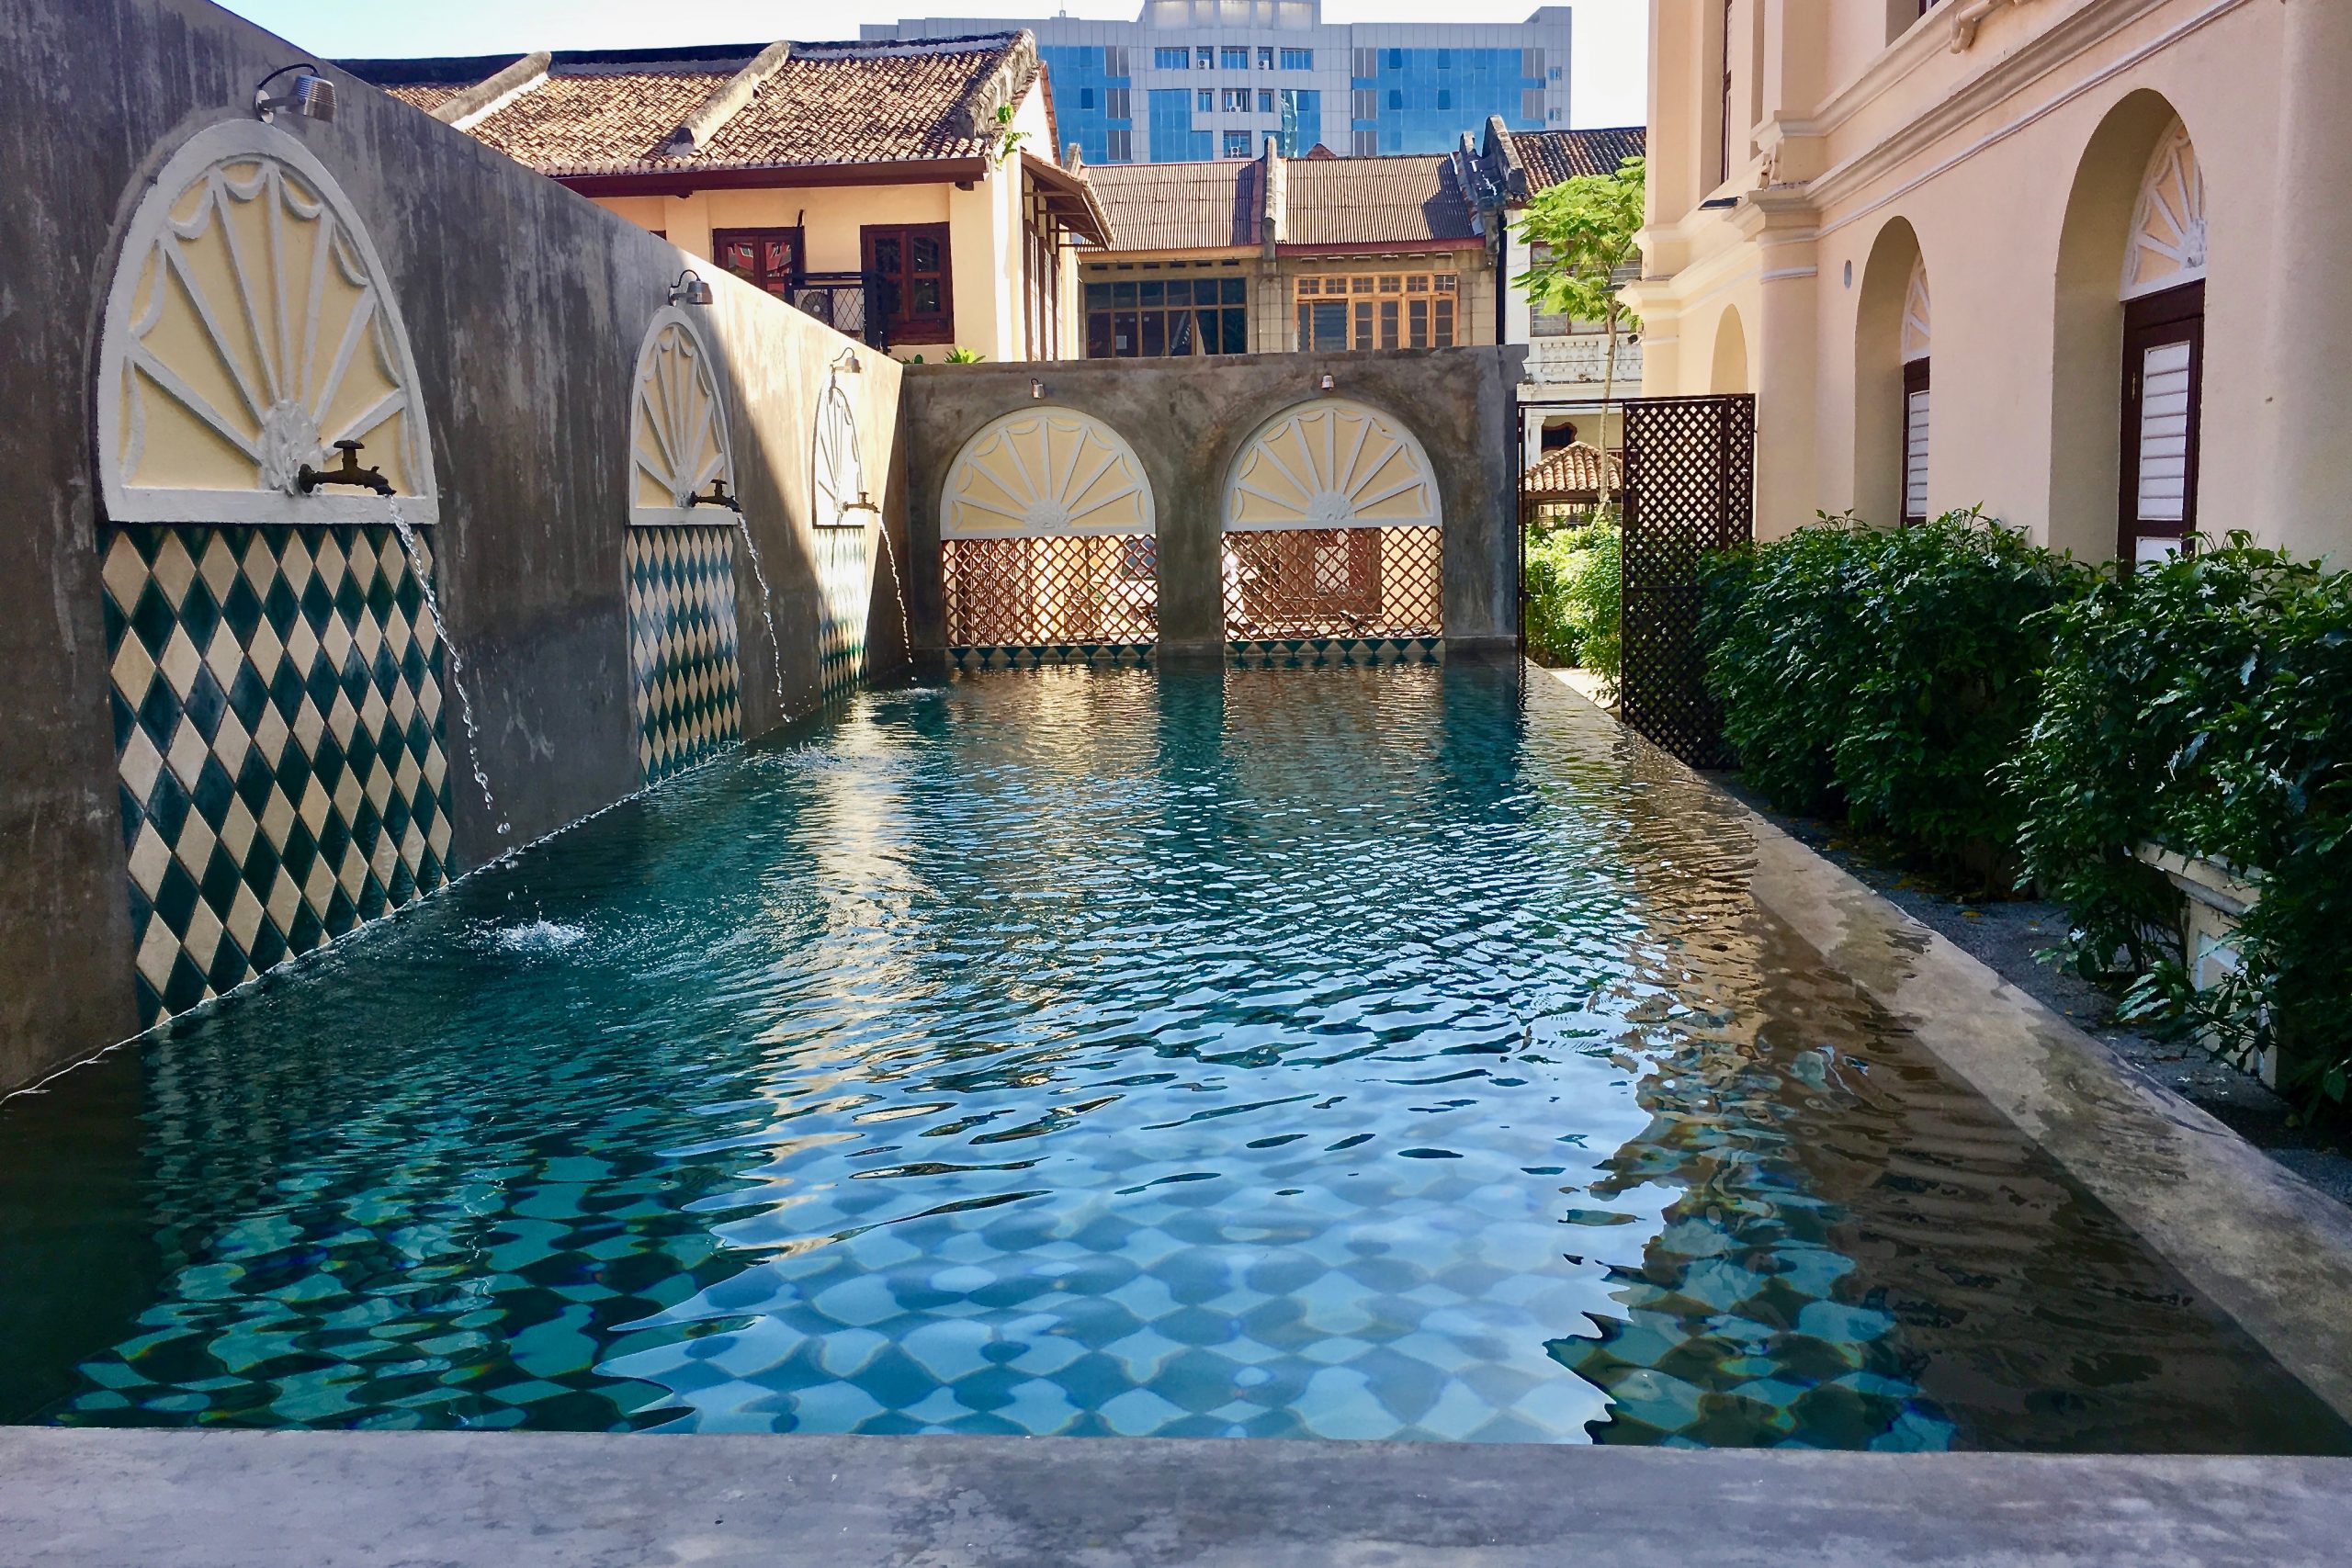 Swimming Pool | Mansion Room | Jawi Peranakan Mansion | Food For Thought